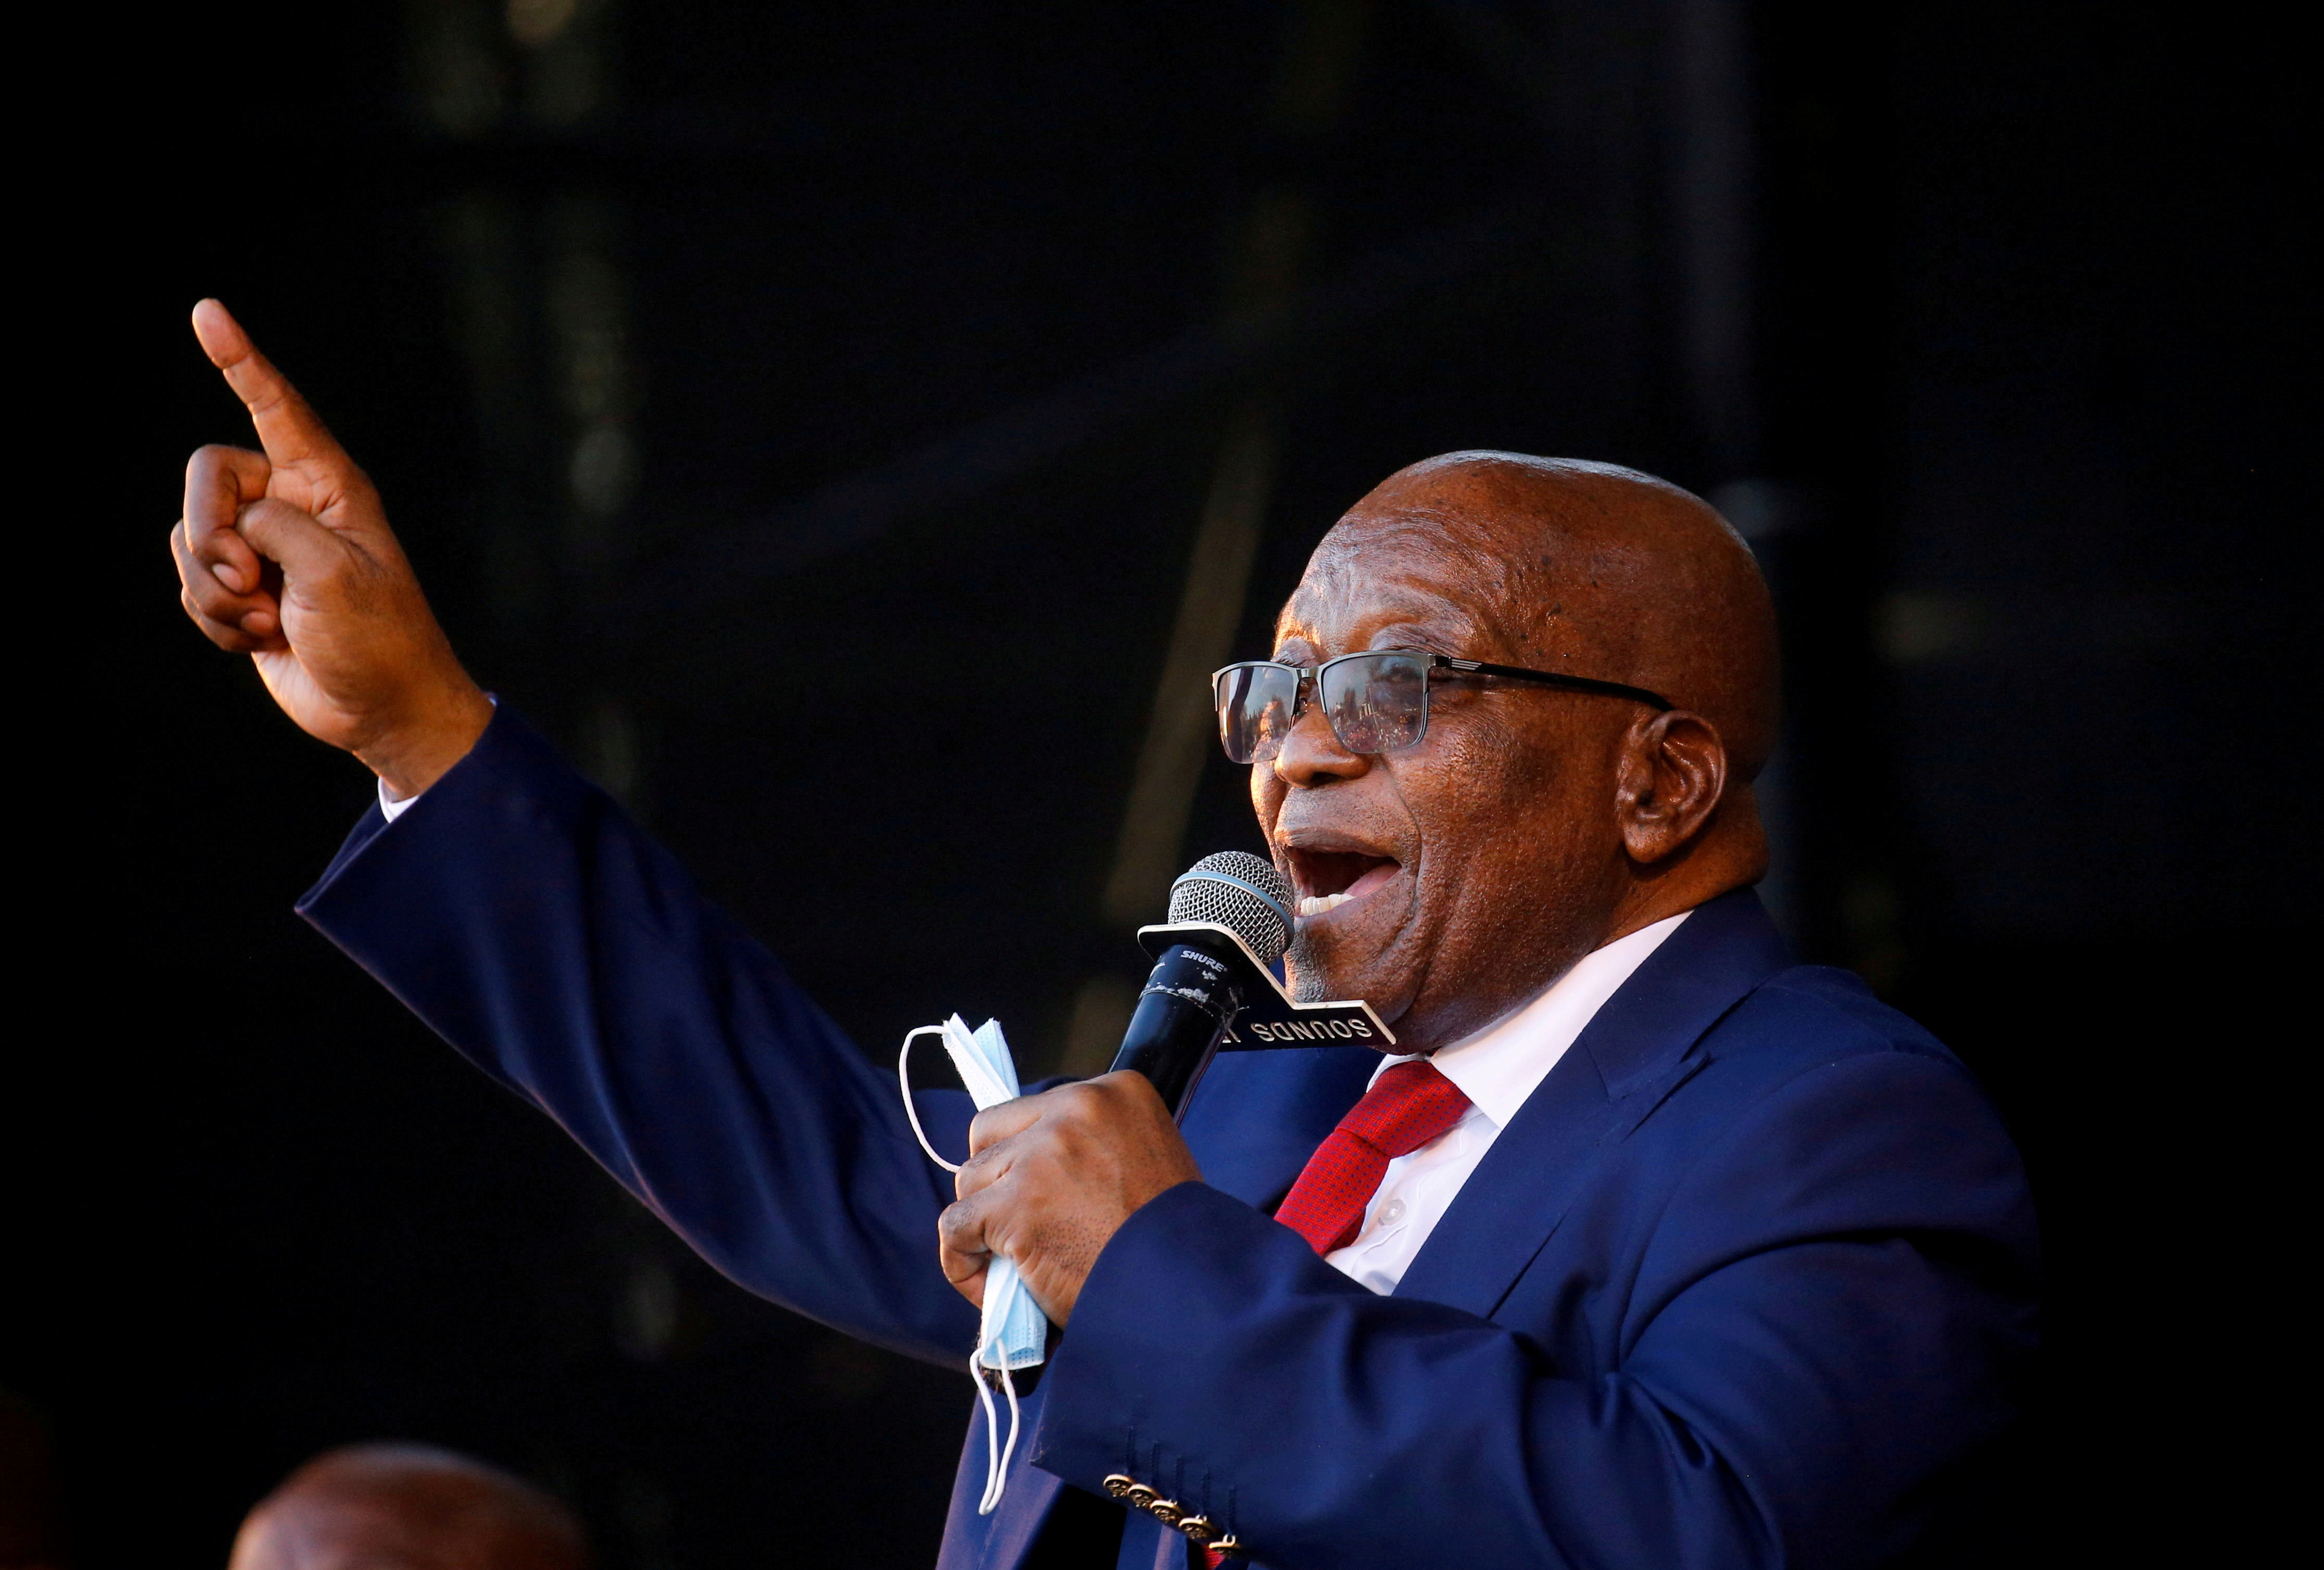 South Africa's former President Zuma appears at the High Court in Pietermaritzburg